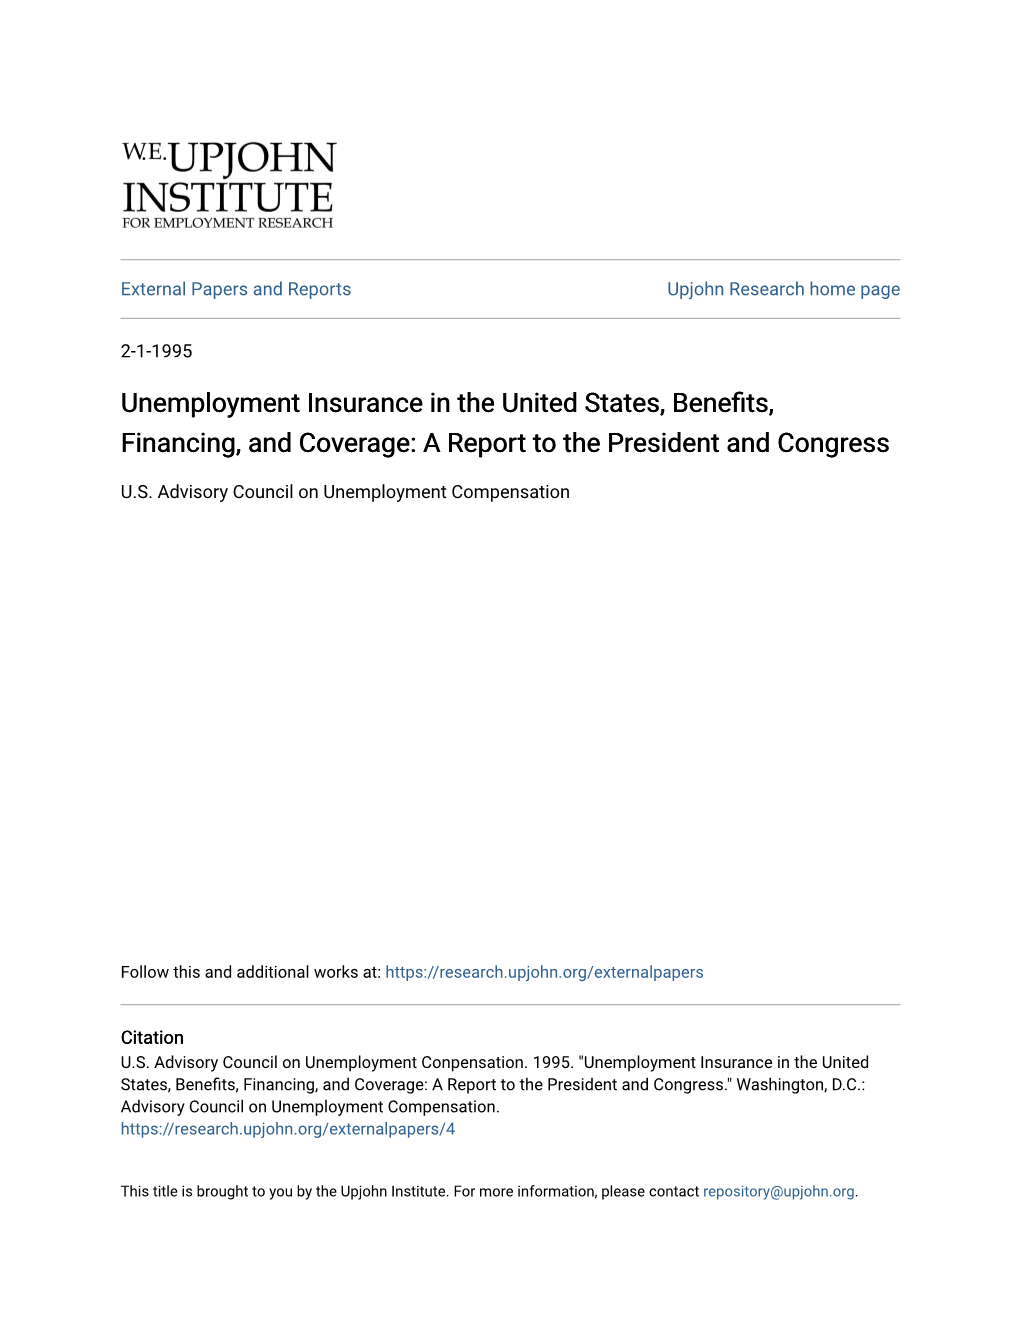 Unemployment Insurance in the United States, Benefits, Financing, and Coverage: a Report to the President and Congress